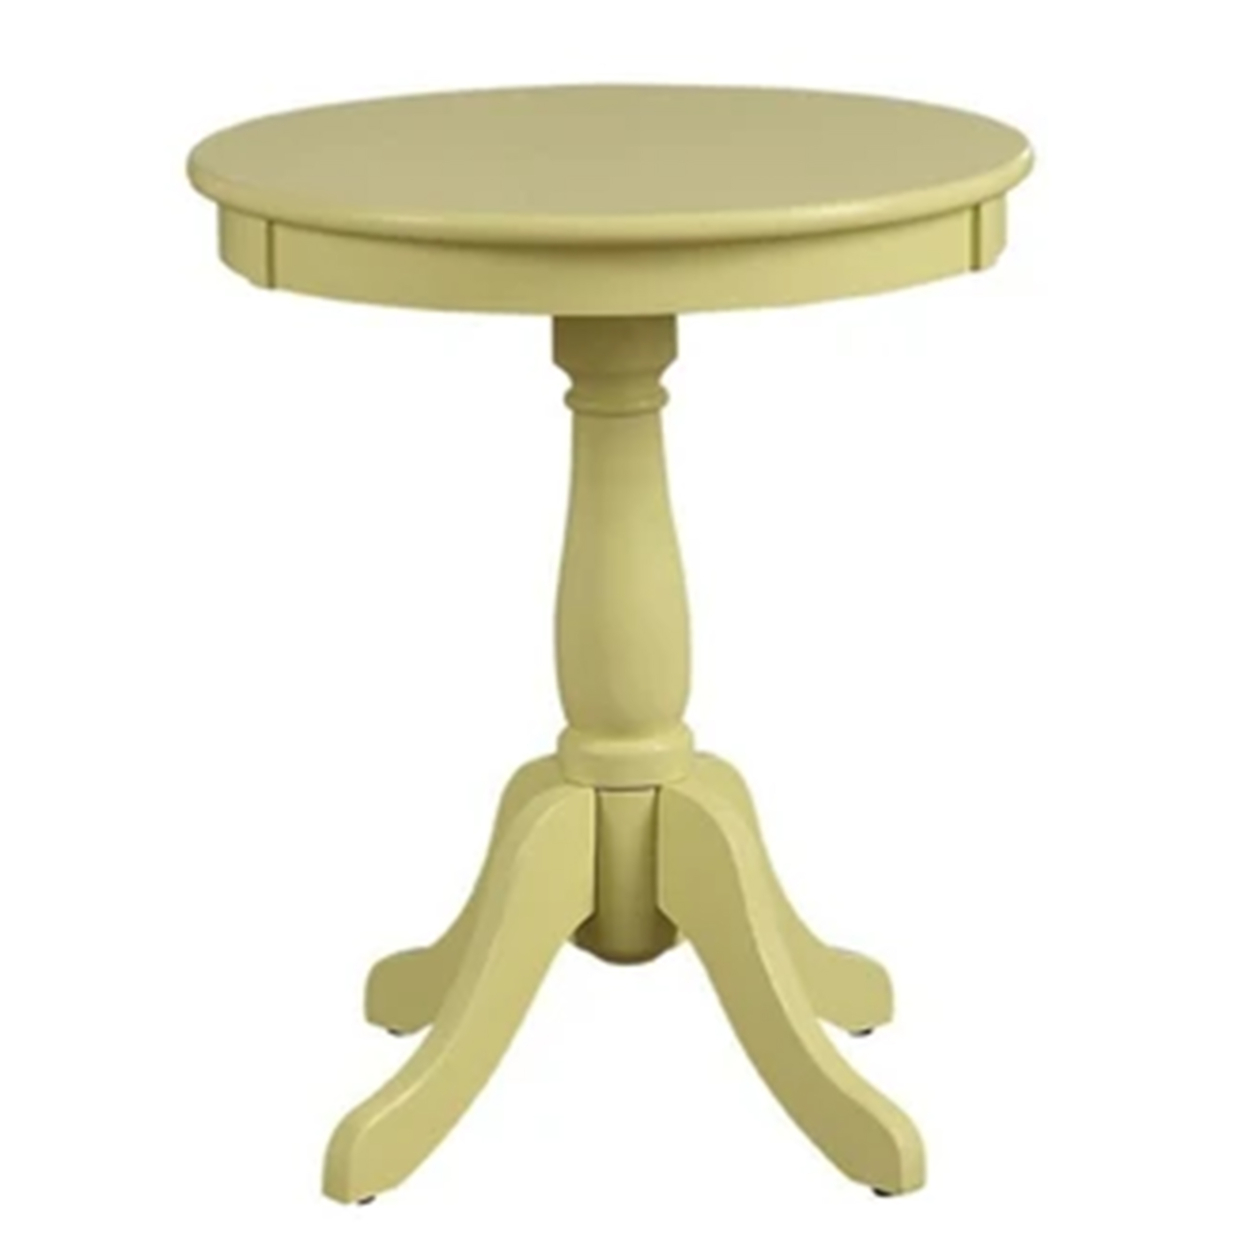 Traditional Style Wooden Round Side Table With Turned Pedestal Base, Yellow- Saltoro Sherpi